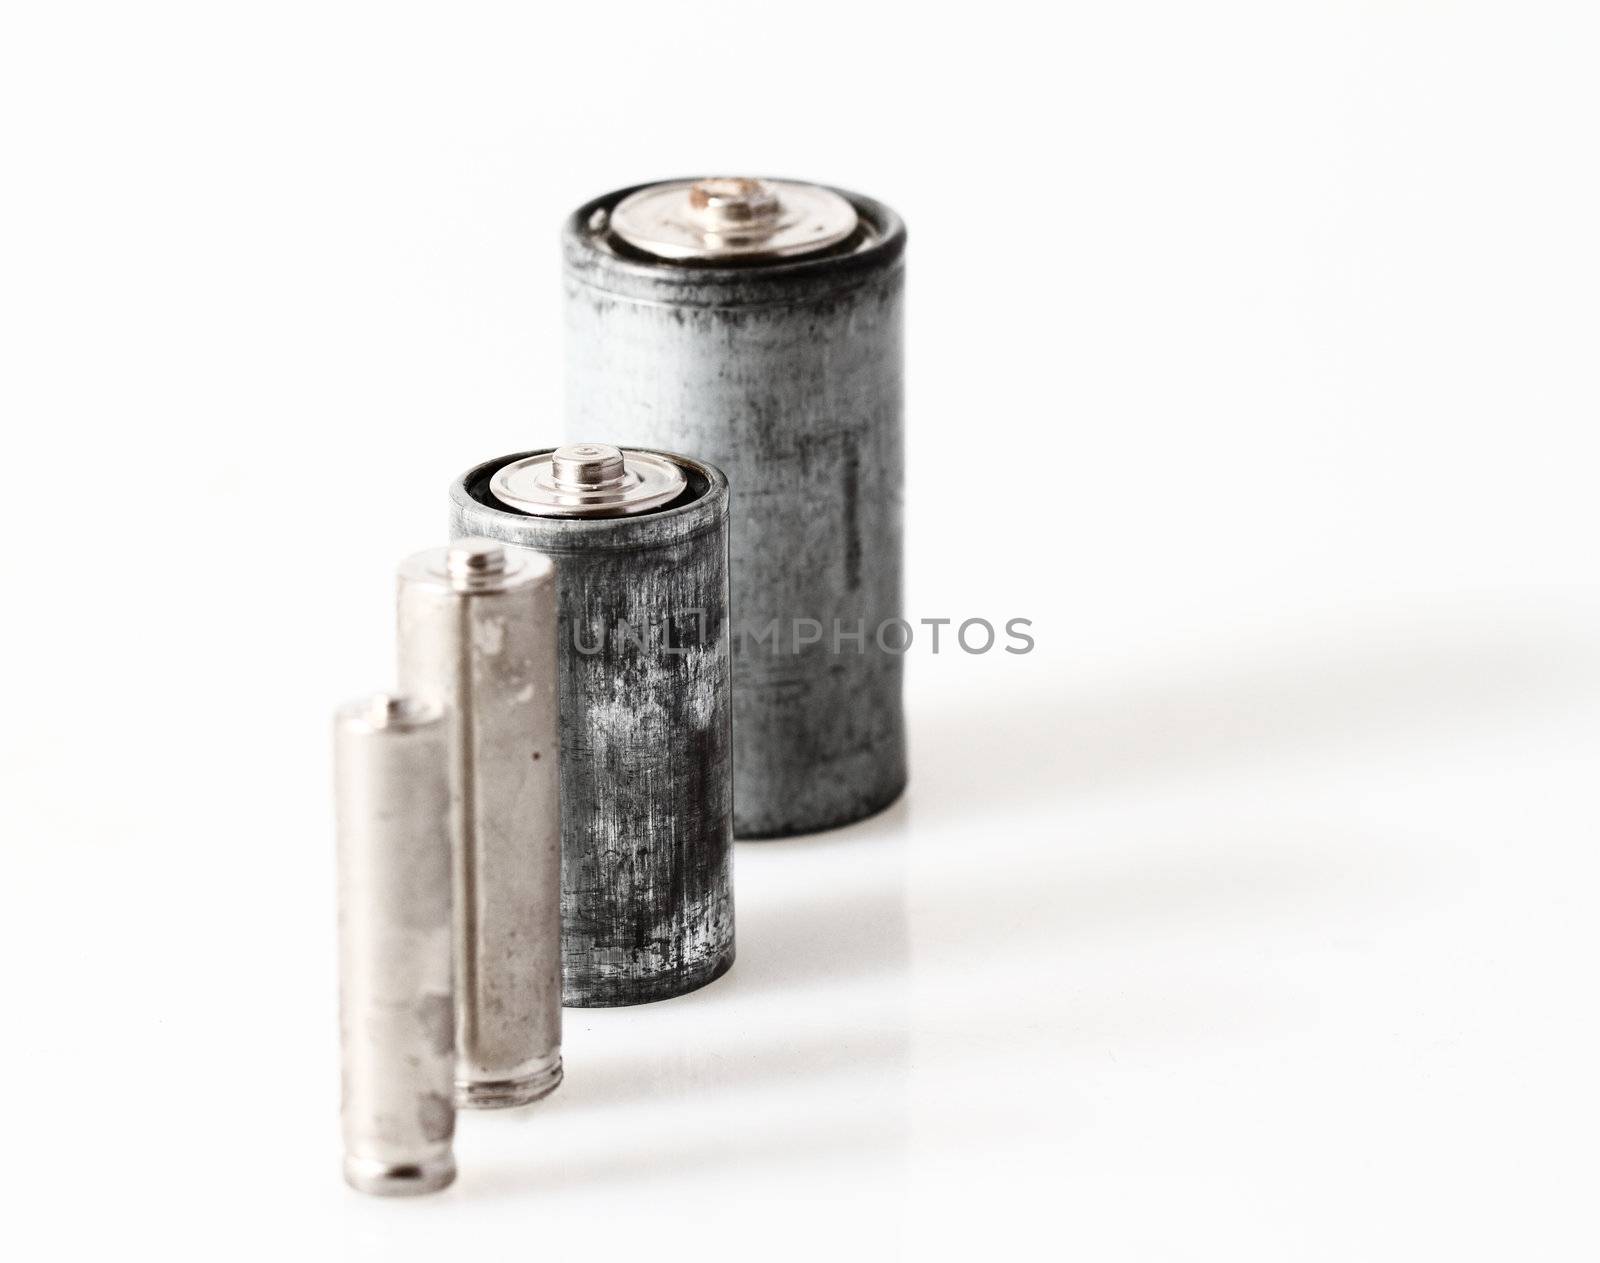 Old batteries by Nneirda